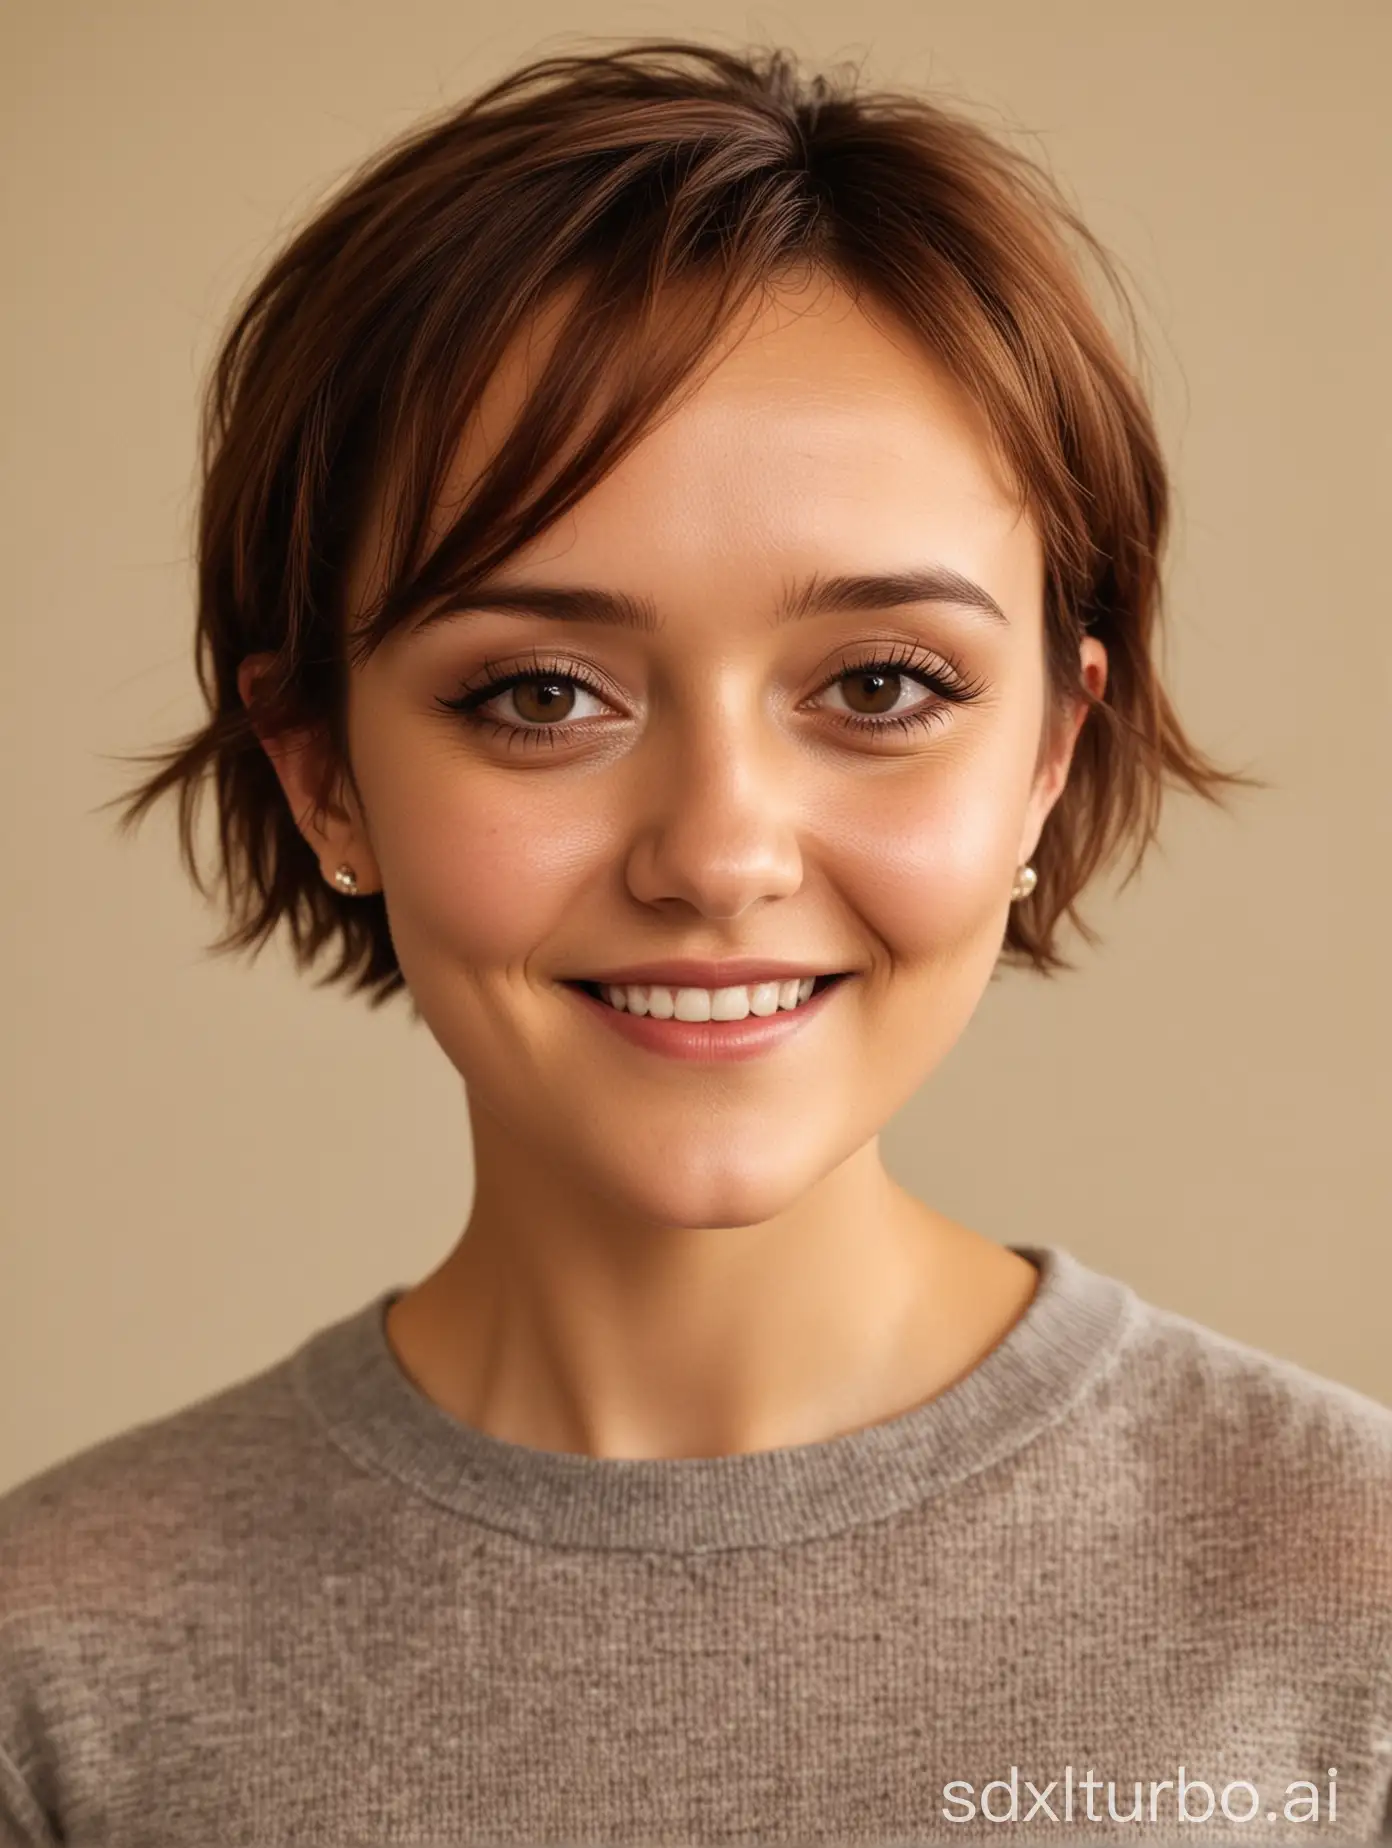 35 yo actress olivia cooke with a short haircut is posing for a photo, little smile, perfect face